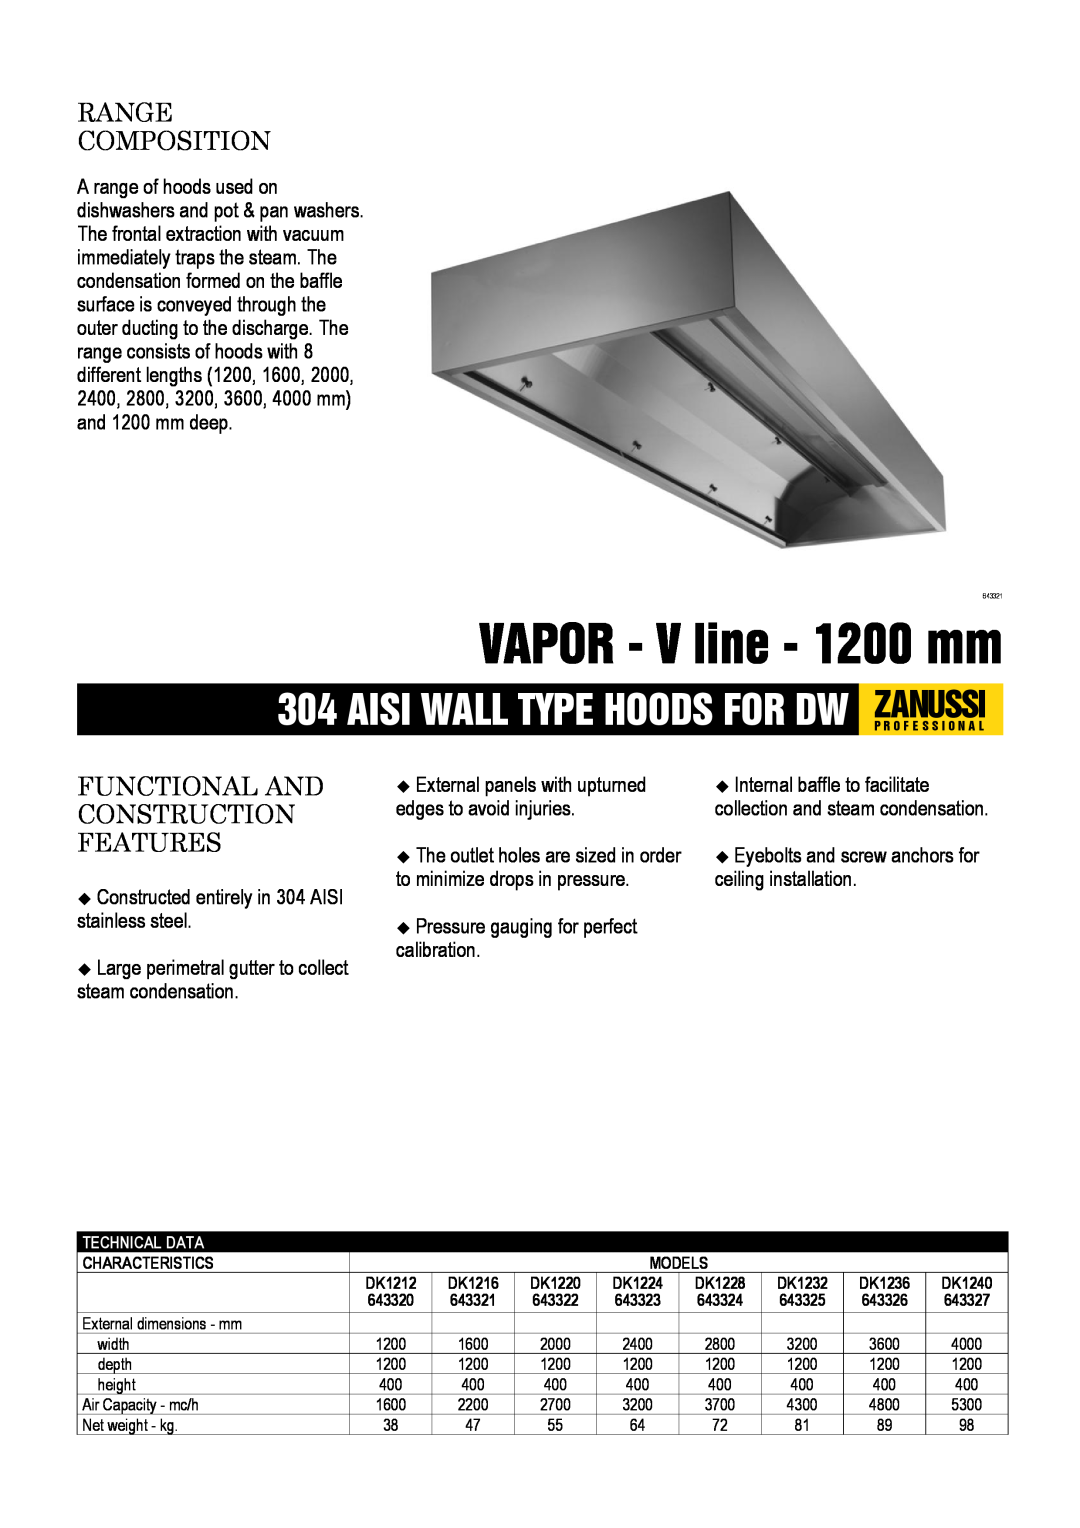 Zanussi 643325, 643322, 643320 dimensions VAPOR - V line - 1200 mm, Range Composition, Functional And Construction Features 